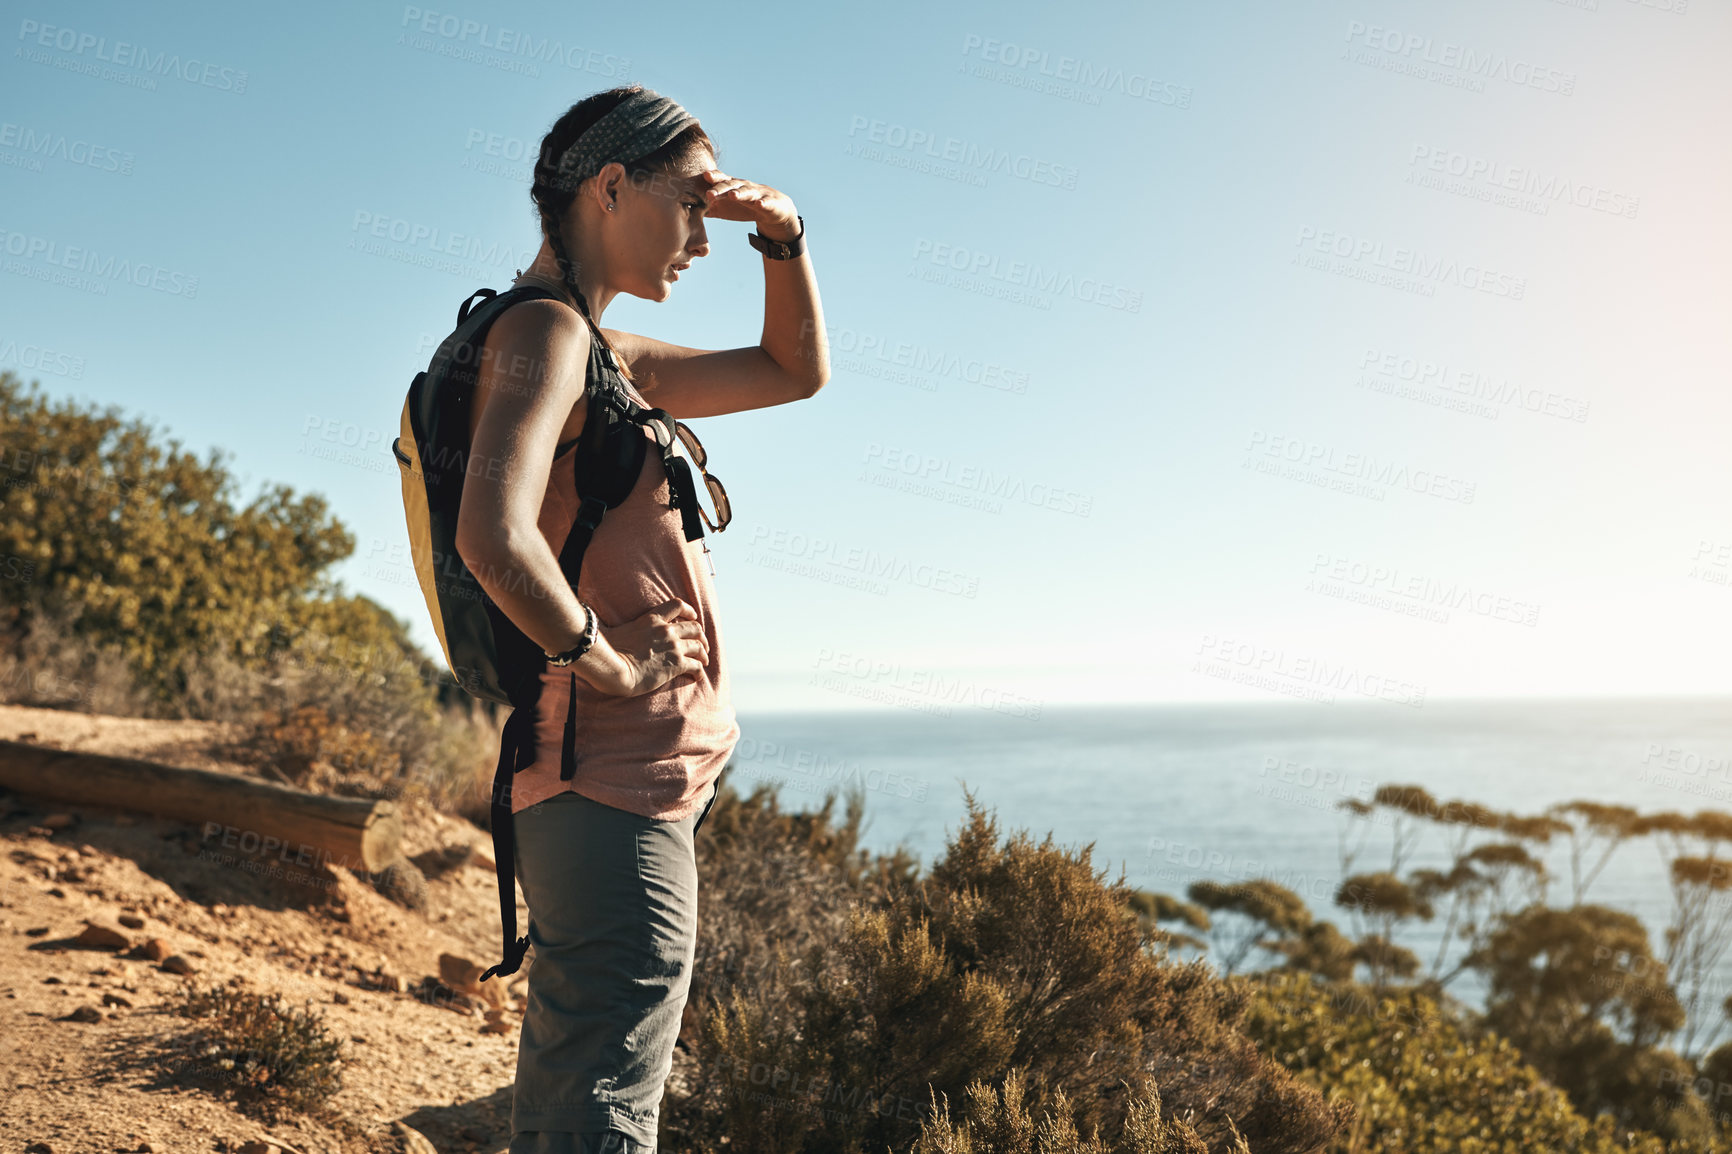 Buy stock photo Shot of a young woman admiring the view from the top of a mountain